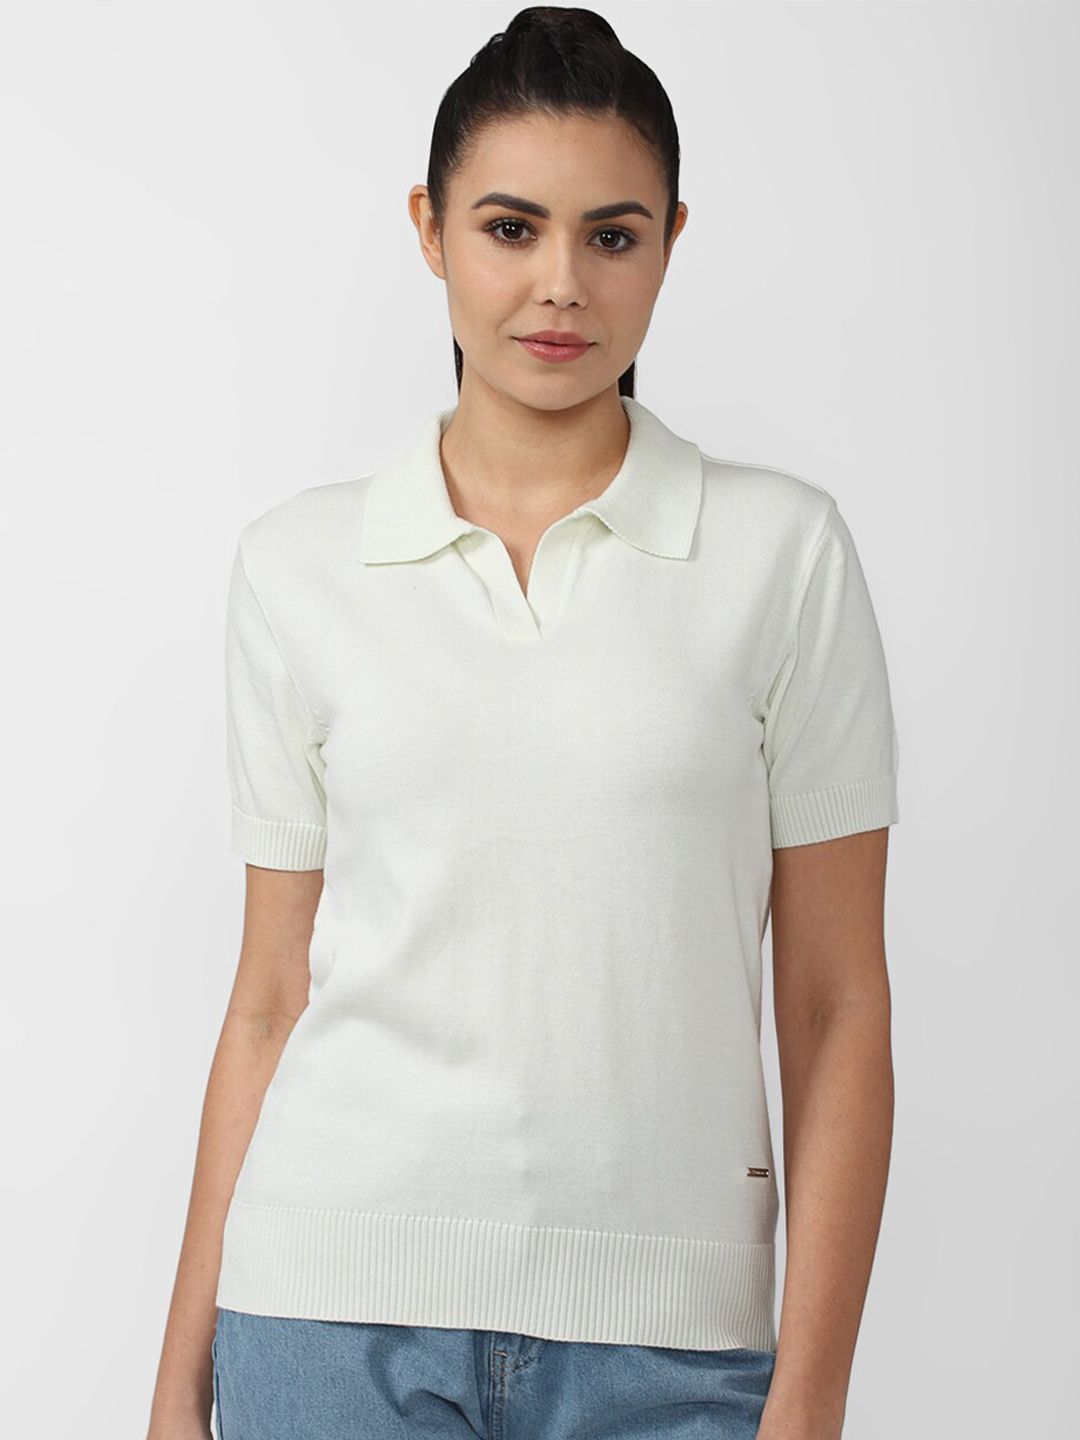 Van Heusen Woman Solid White Pure Cotton Shirt Style Top Price in India